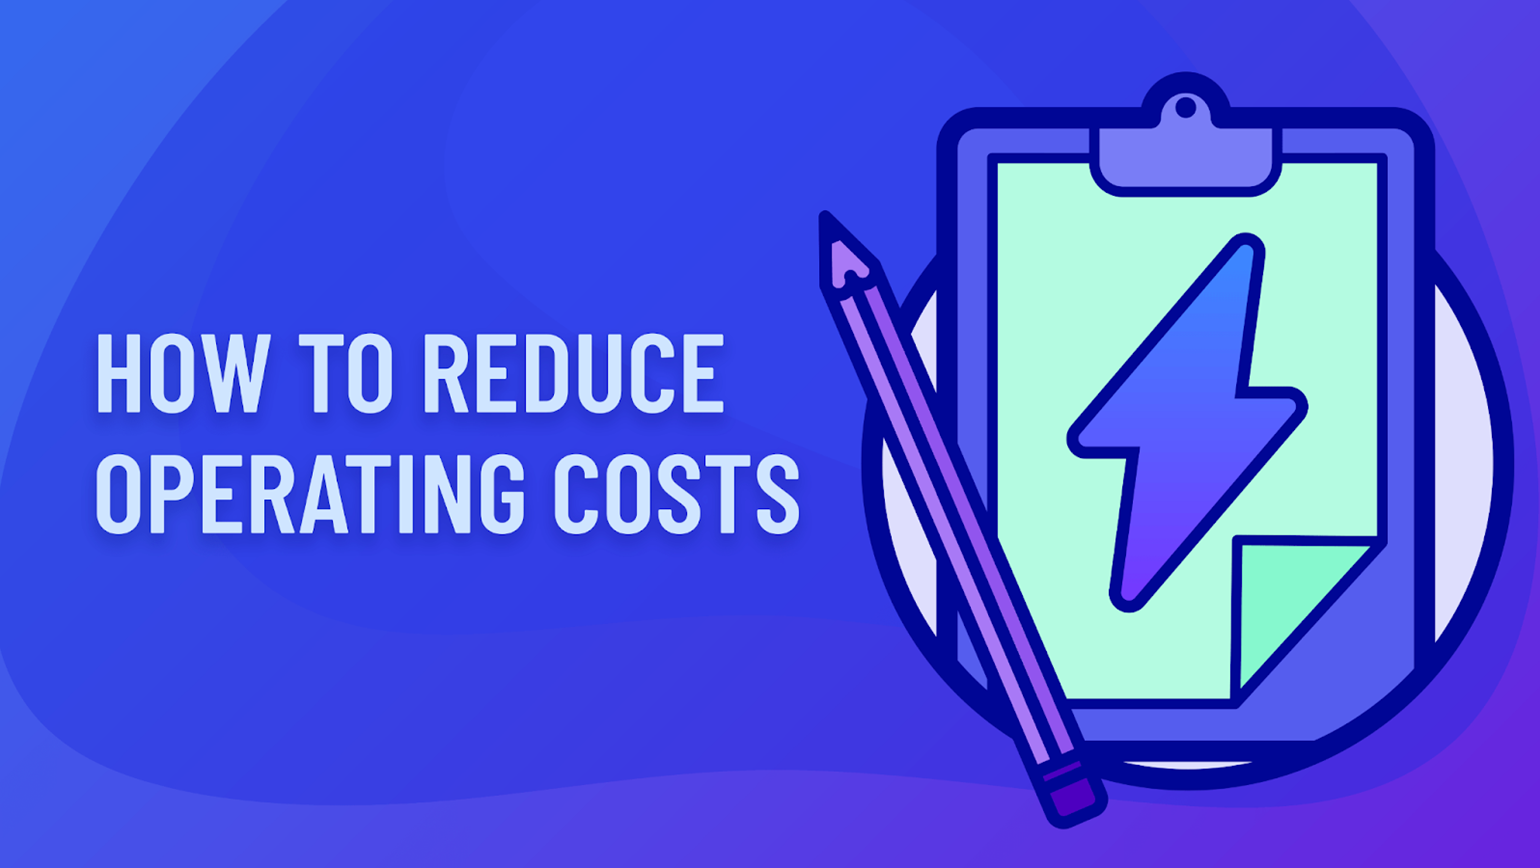 How To Reduce Operating Costs